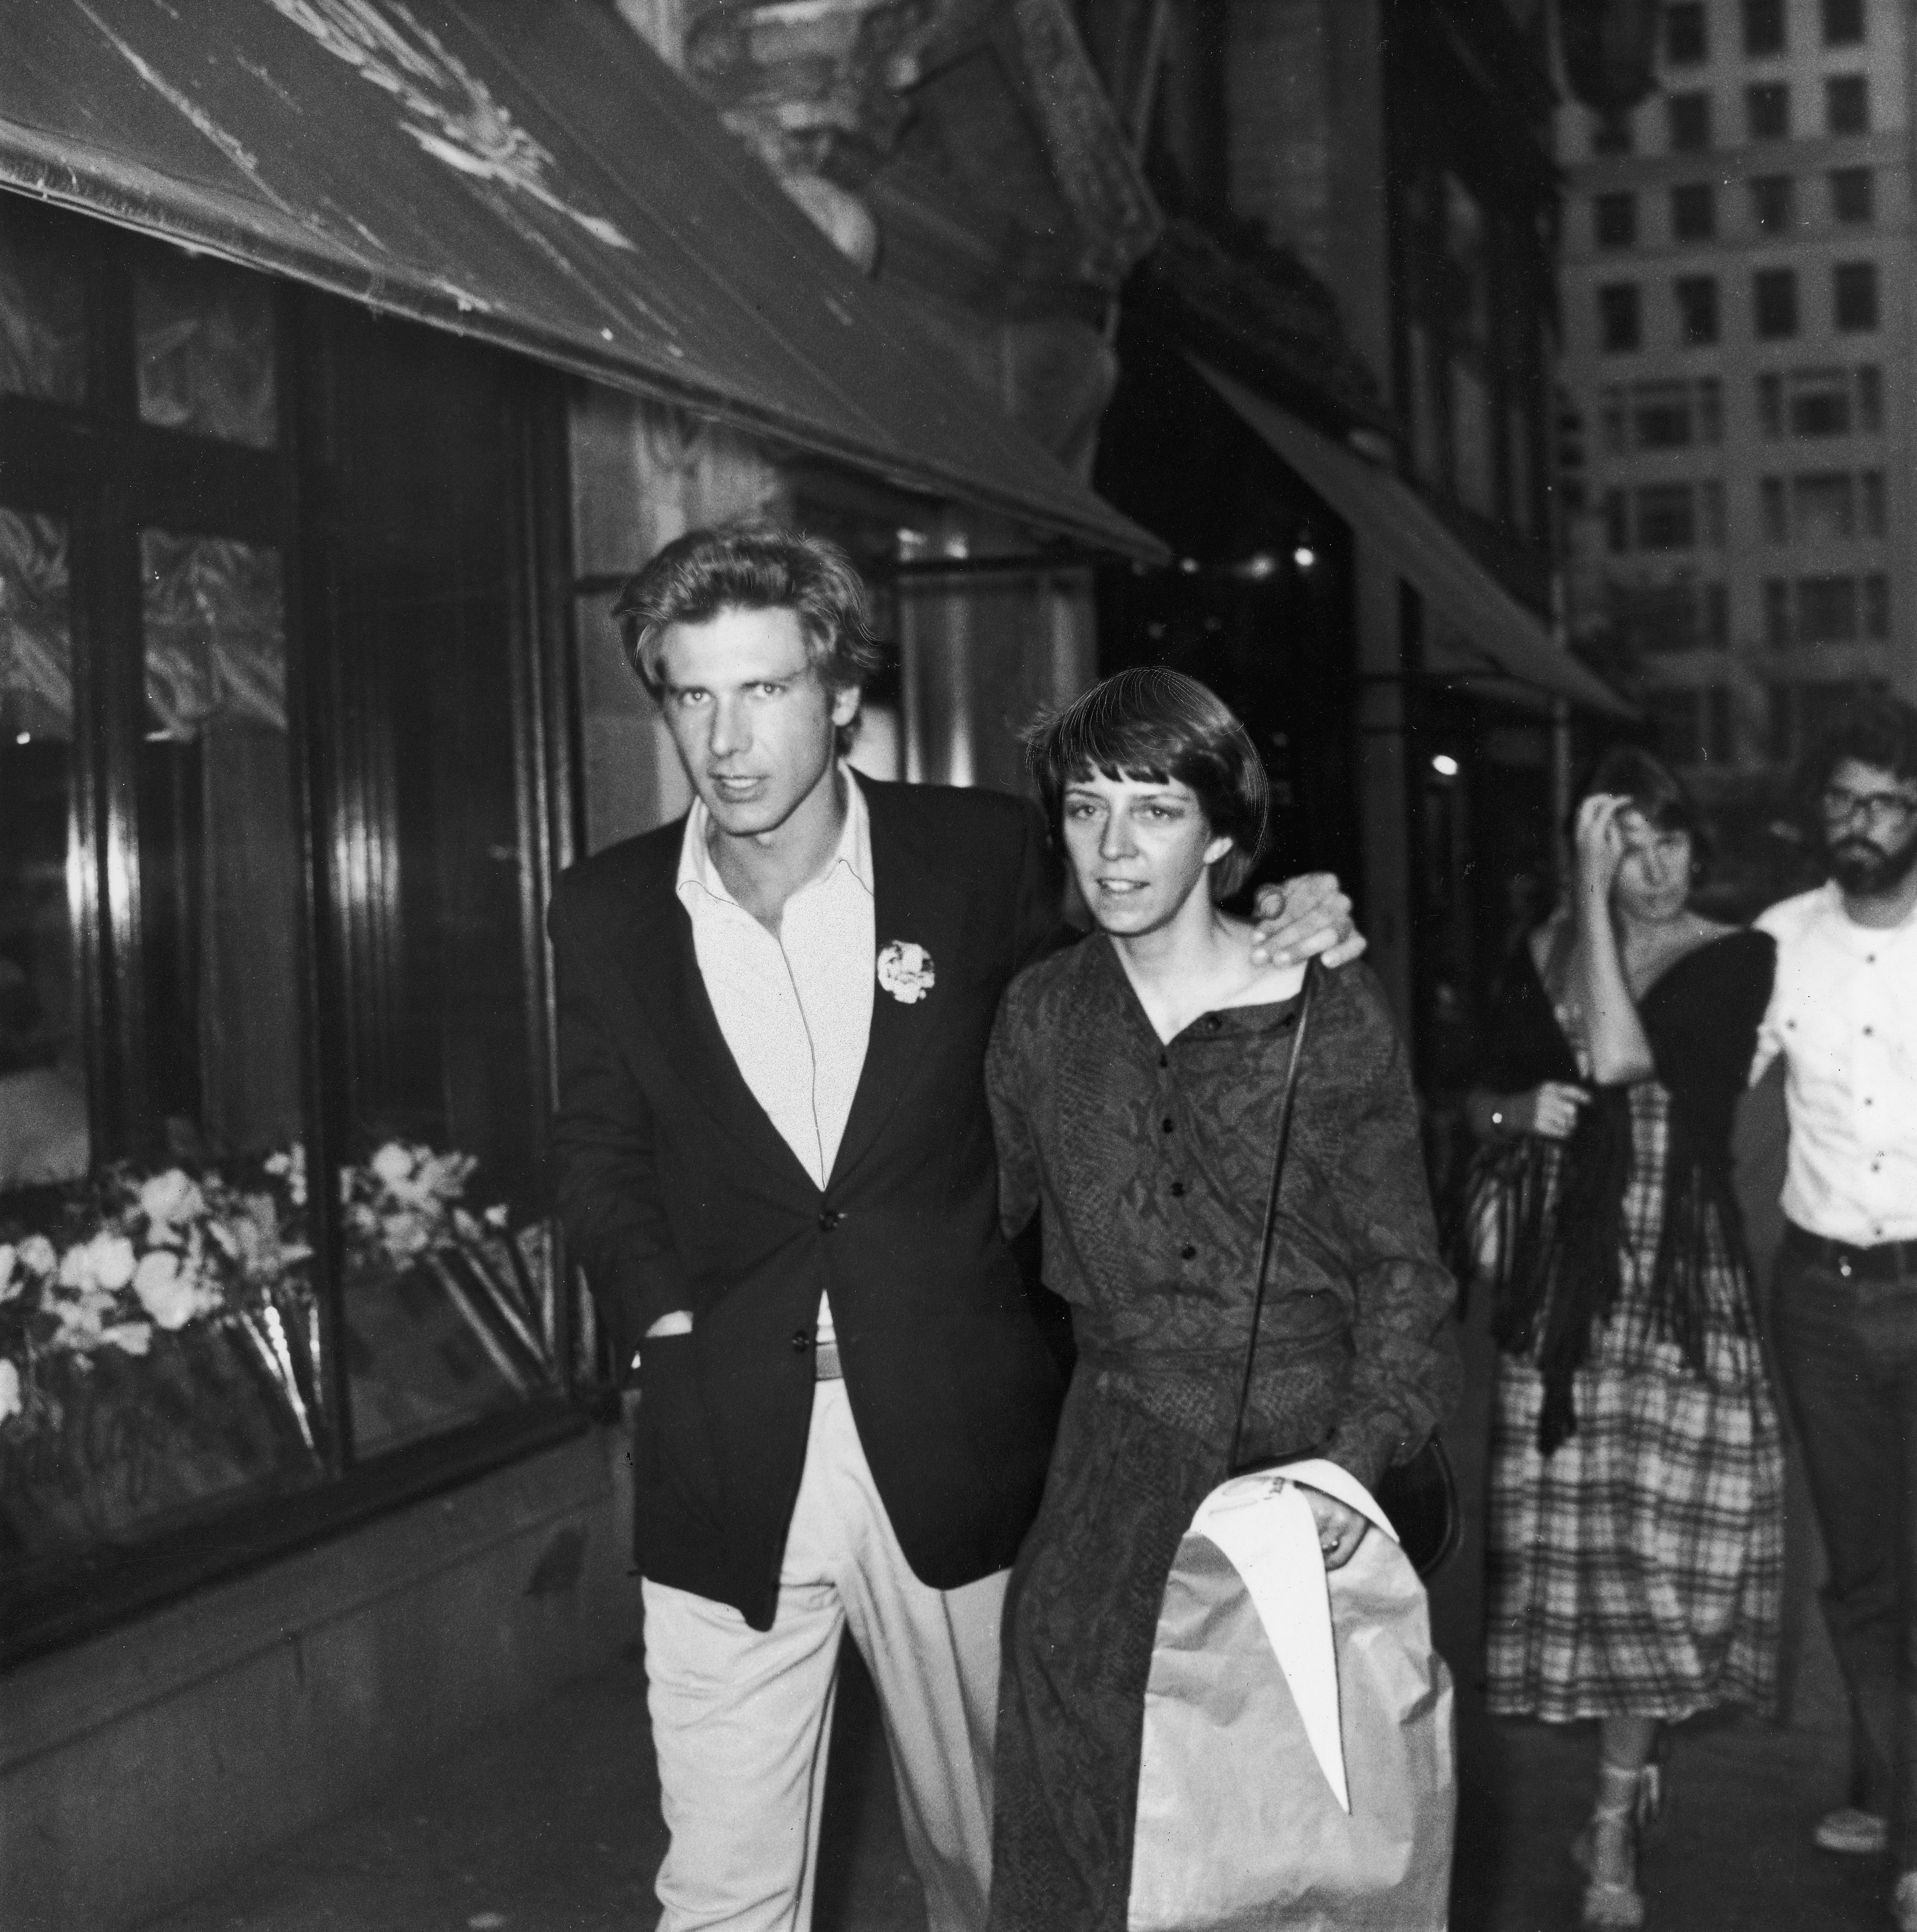 Harrison Ford and Mary Marquardt in June 1977 in New York City | Source: Getty Images